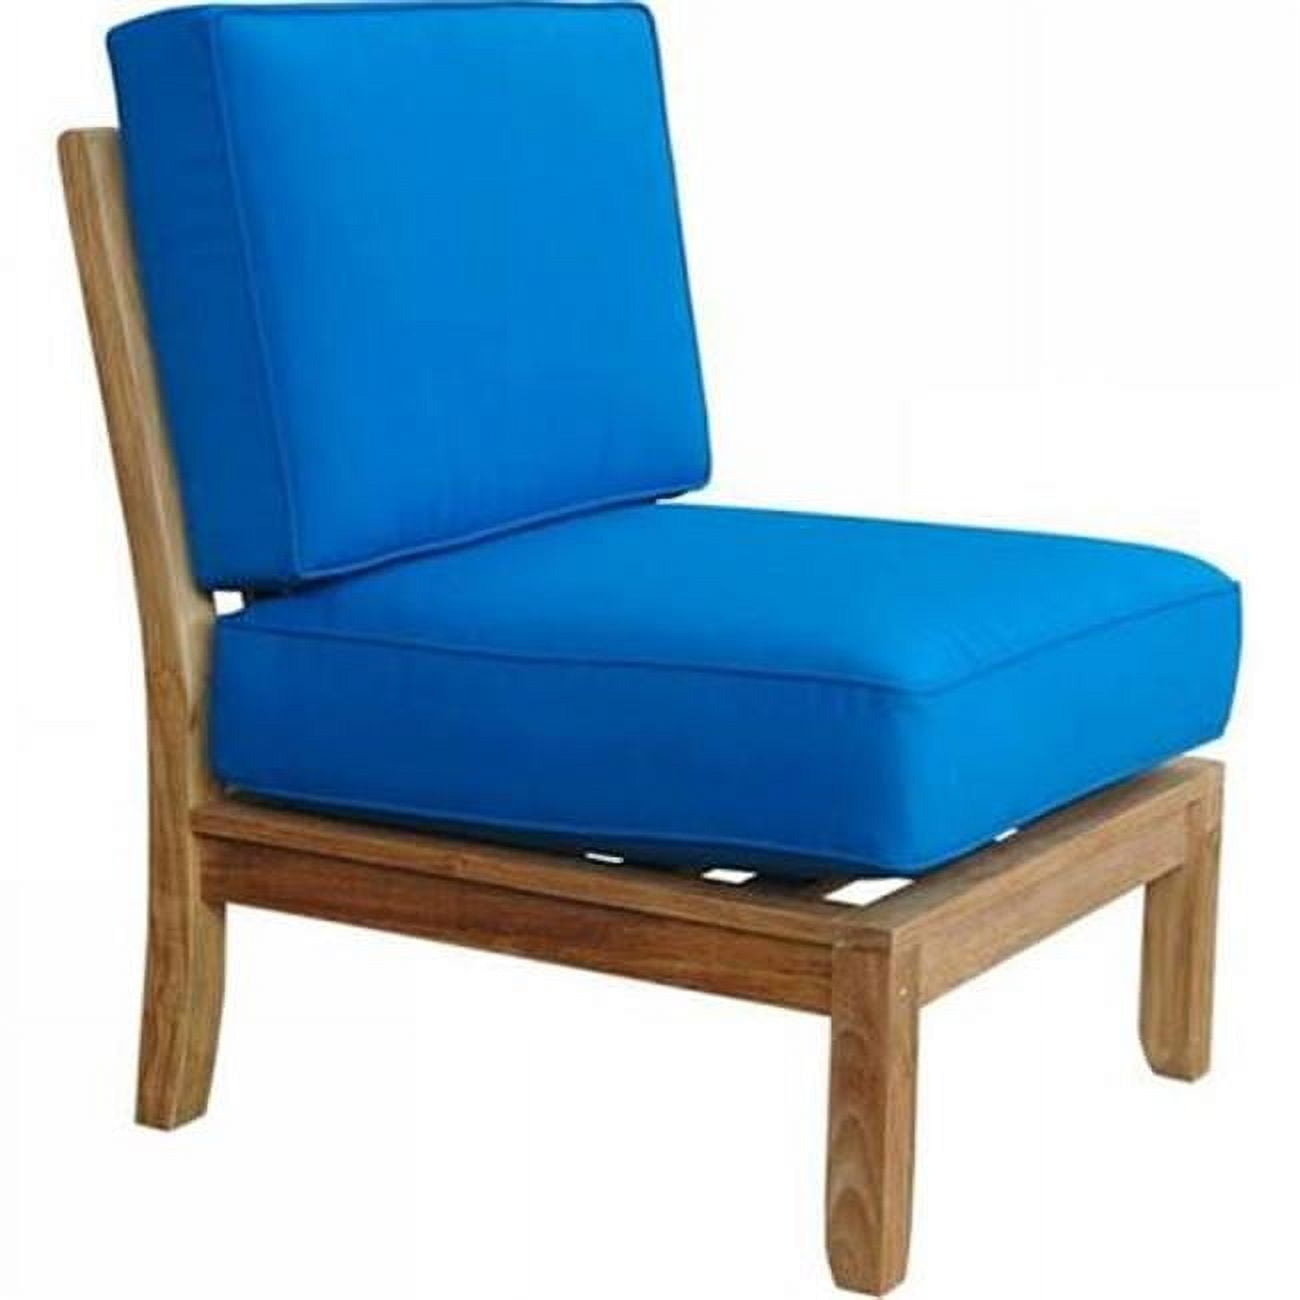 Picture of Anderson Teak DS-701 Natsepa Center Modular Deep Seating